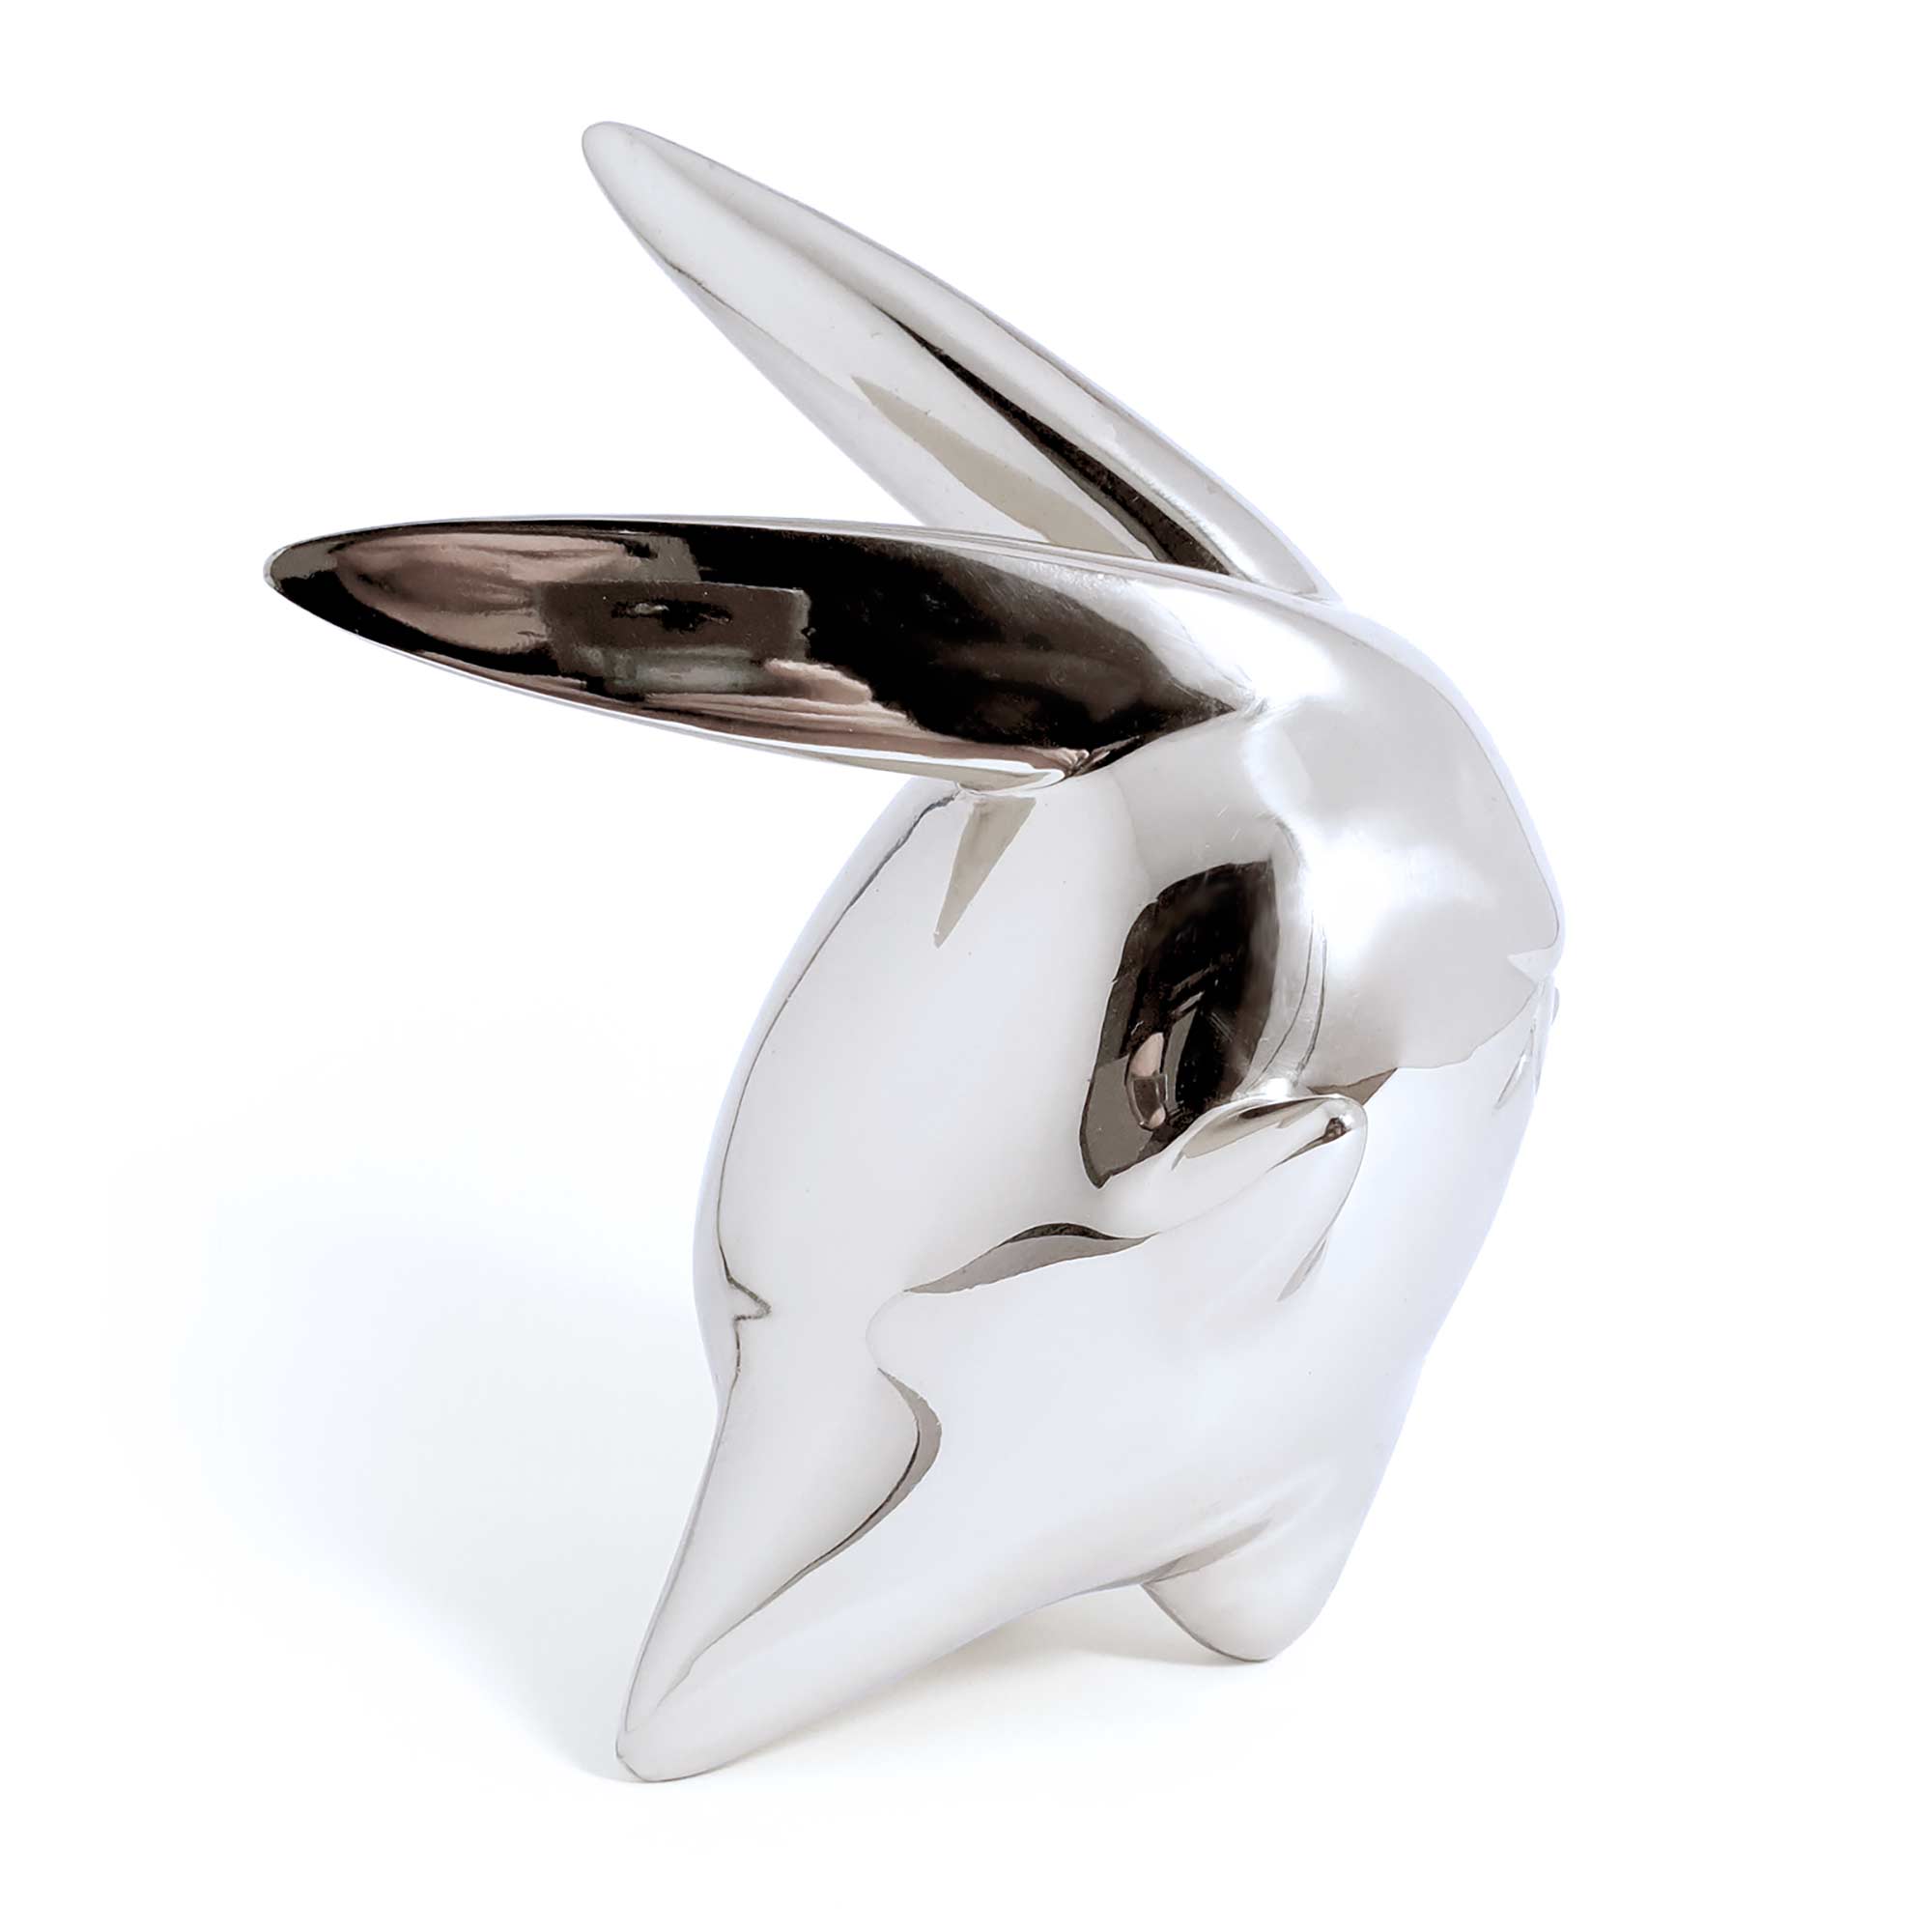 Flight or Fight, bunny rabbit sculpture, Mirror Polished Stainless Steel Sculpture, by artist Ferdi B Dick, side view